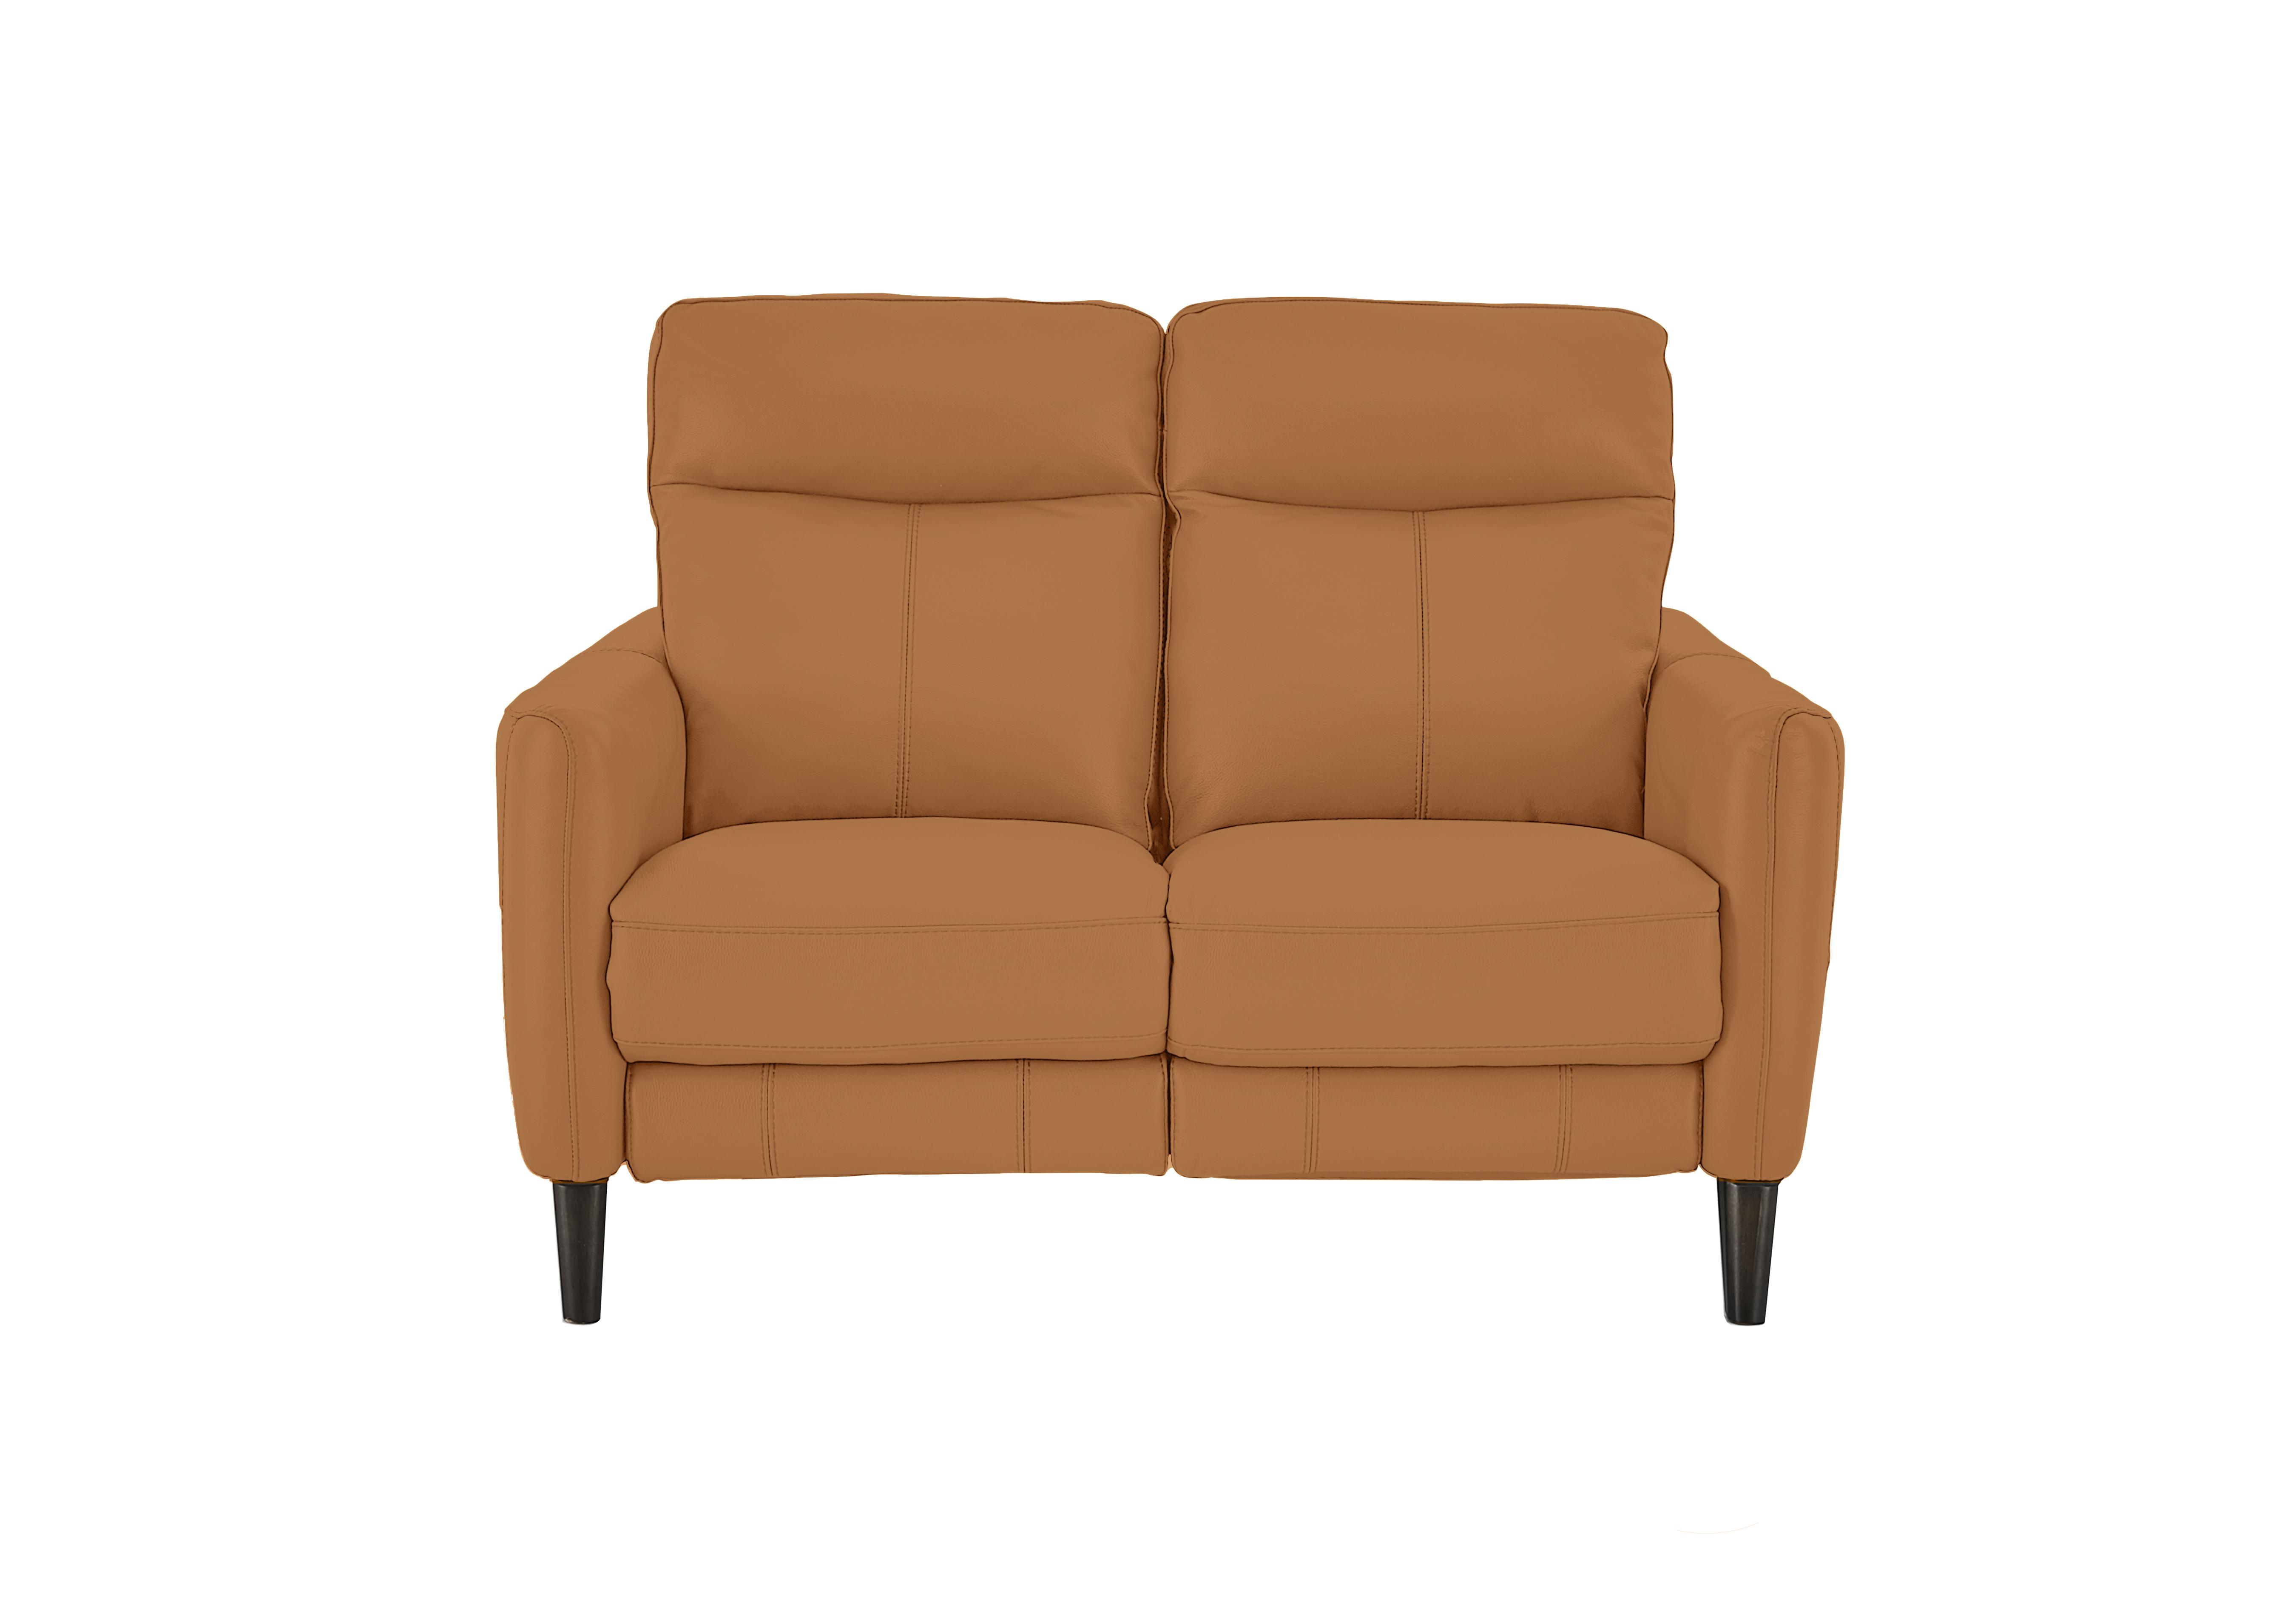 Compact Collection Petit 2 Seater Leather Sofa in Bv-335e Honey Yellow on Furniture Village